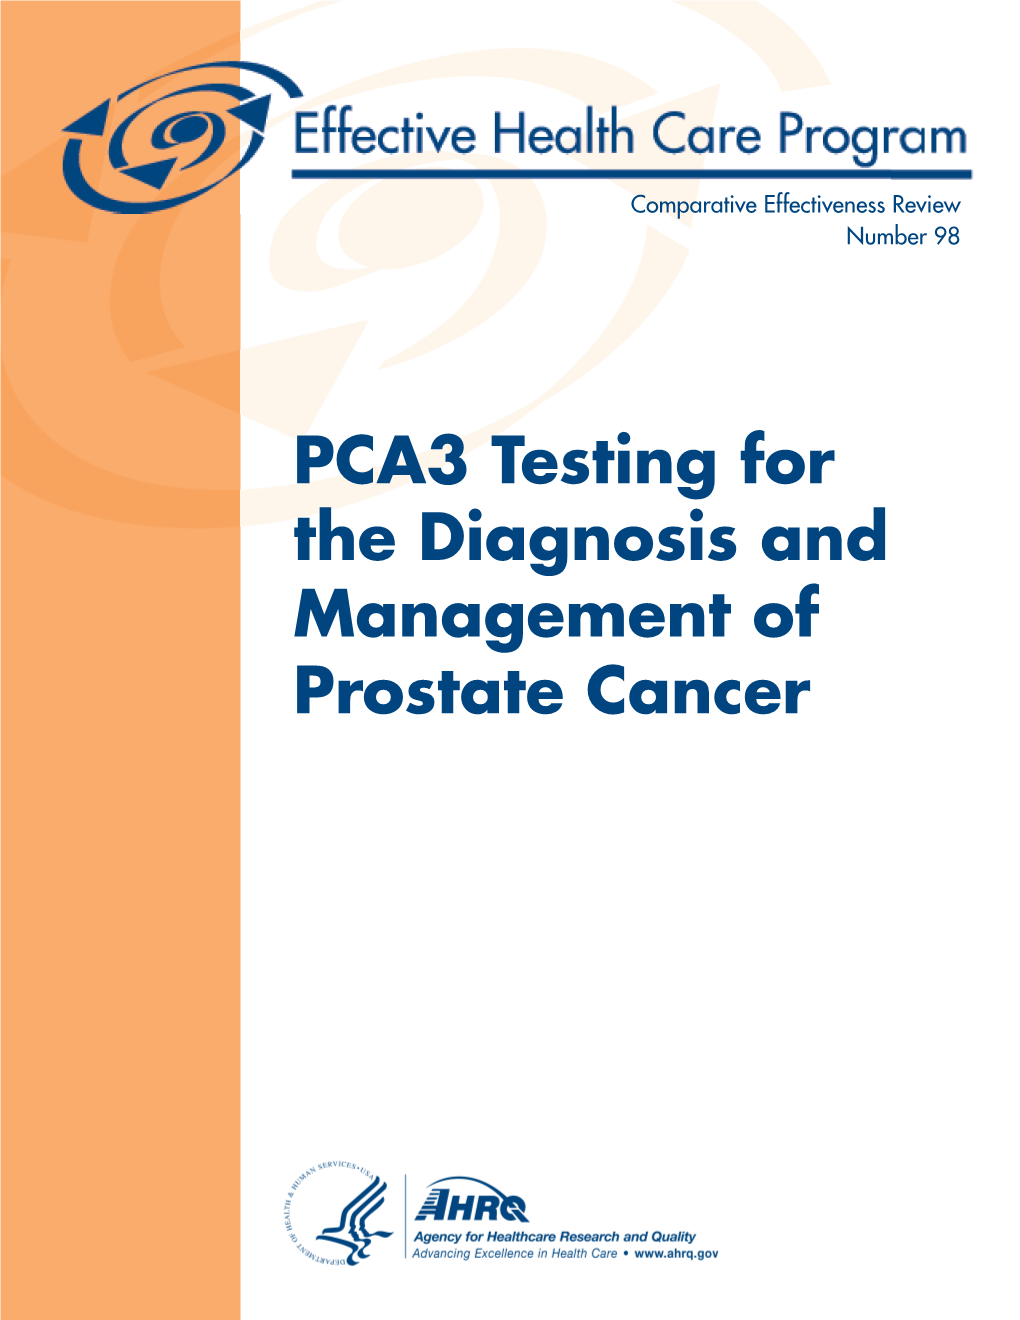 PCA3 Testing for the Diagnosis and Management of Prostate Cancer Comparative Effectiveness Review Number 98